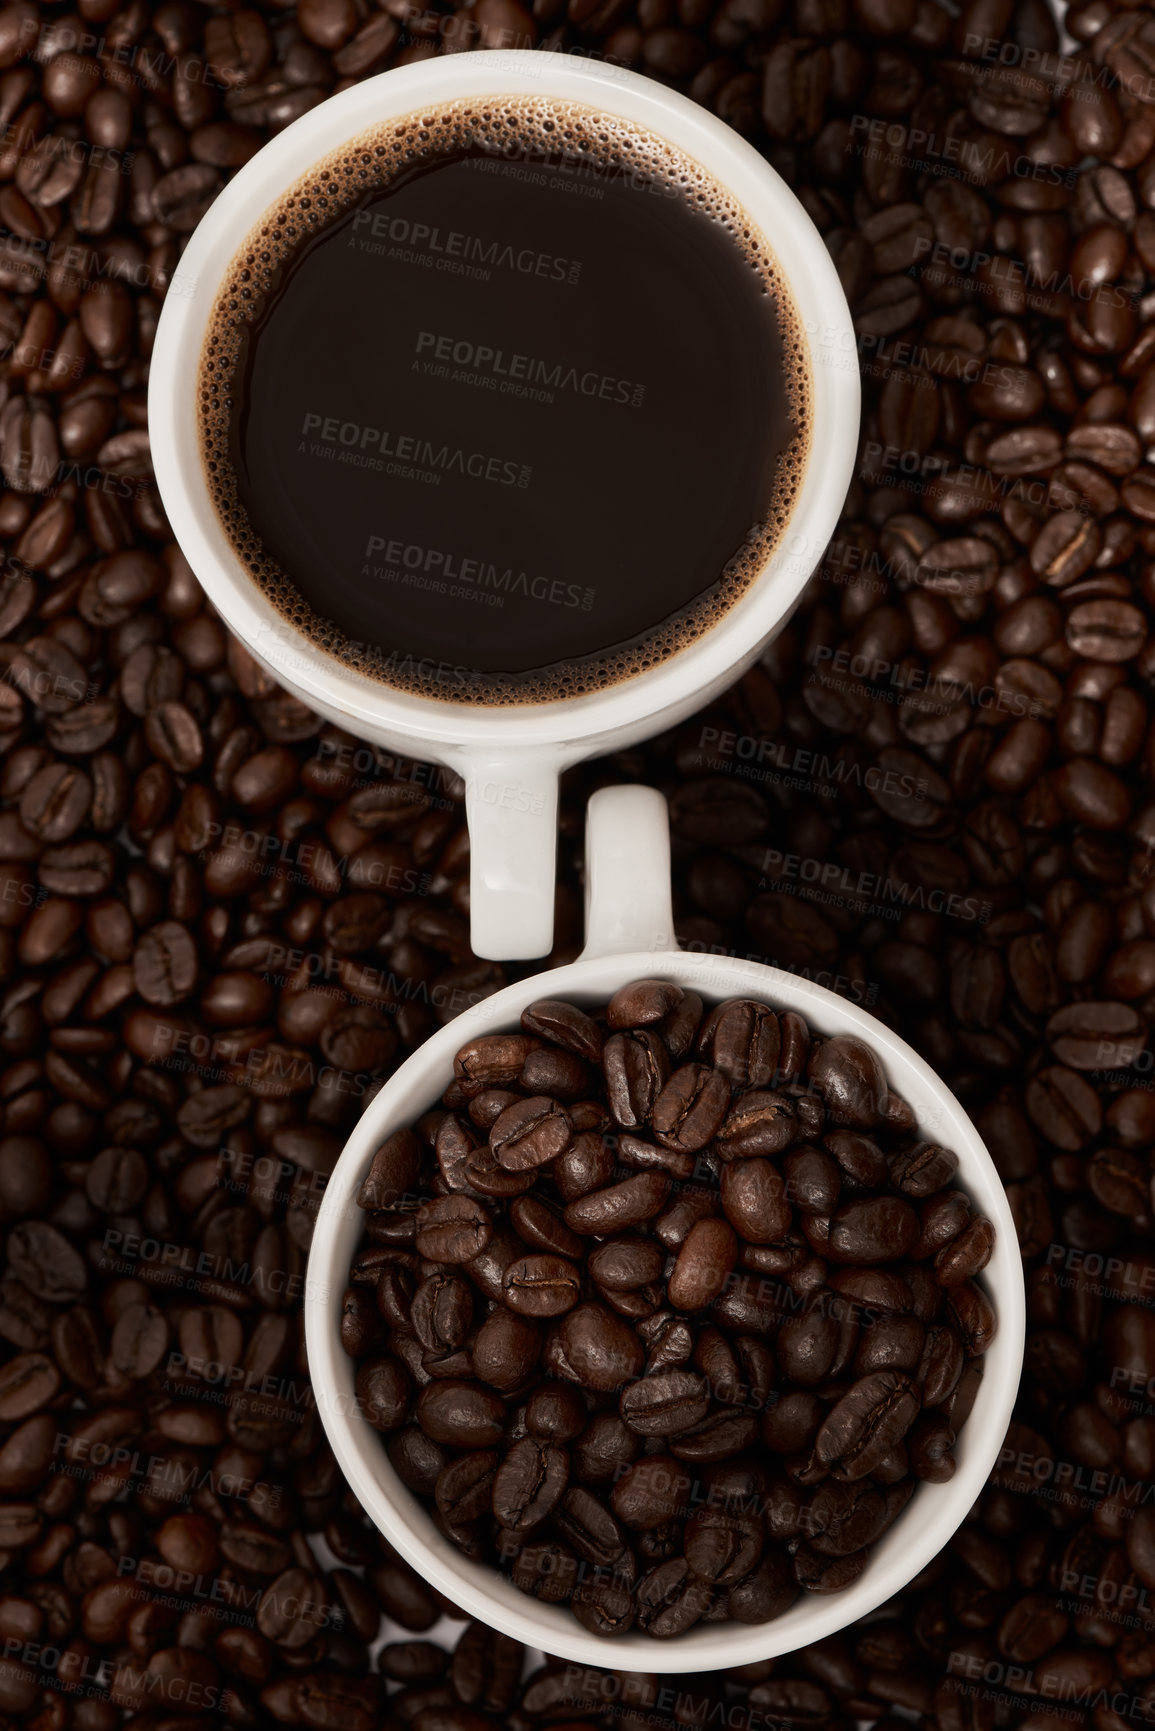 Buy stock photo Closeup shot of two cups of coffee surrounded by coffee beans